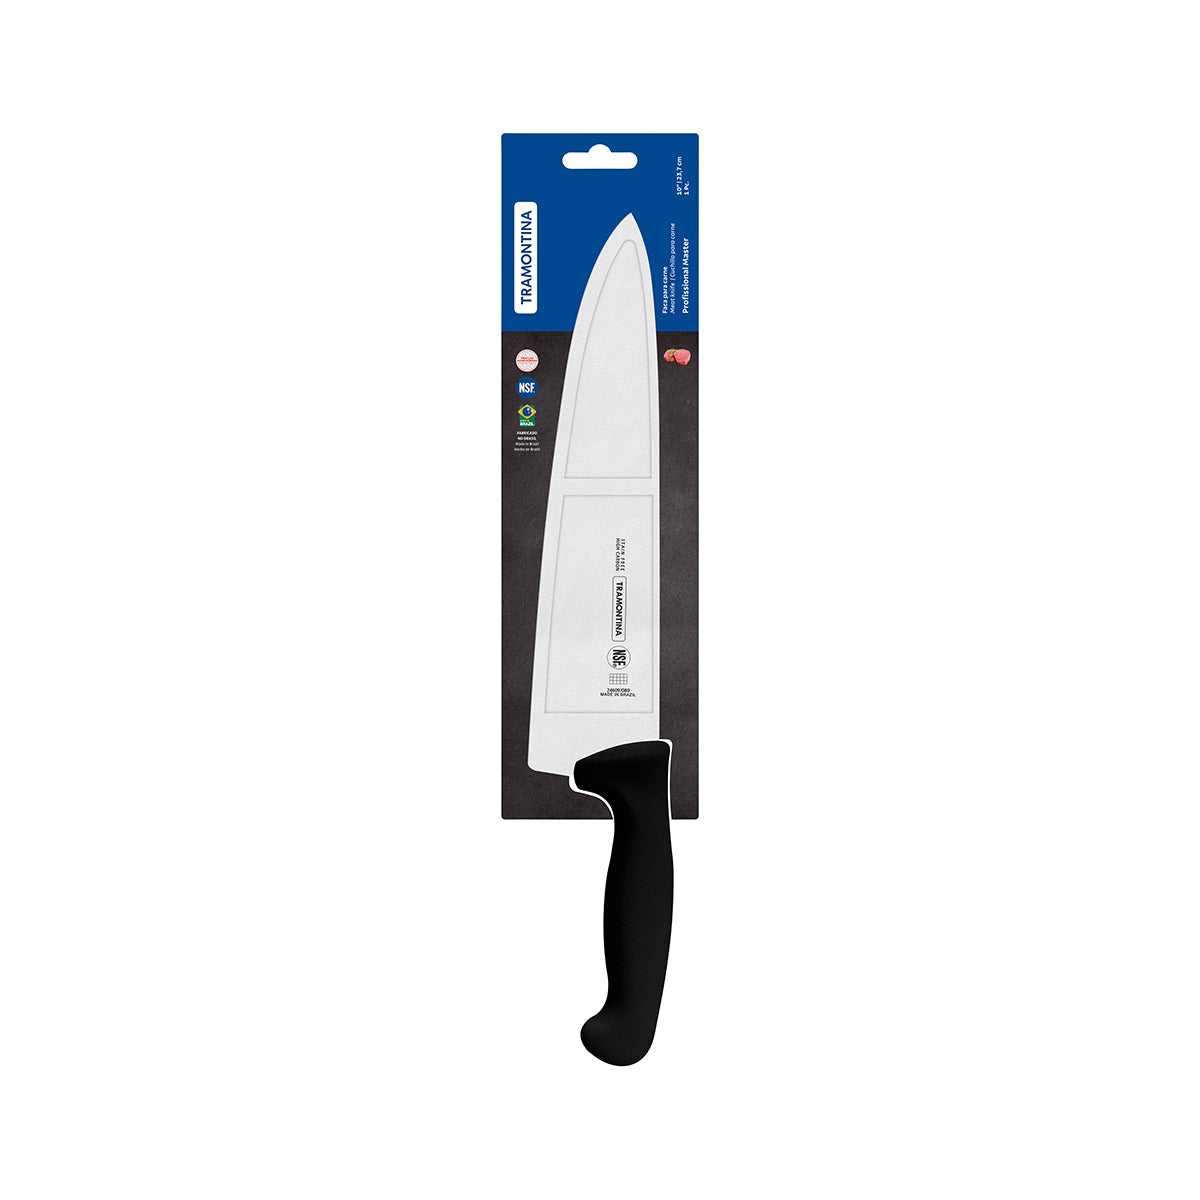 TM24609-100 Tramontina Professional Master Black Handle Chef's Knife Extra Wide with Straight Edge 250mm Tomkin Australia Hospitality Supplies